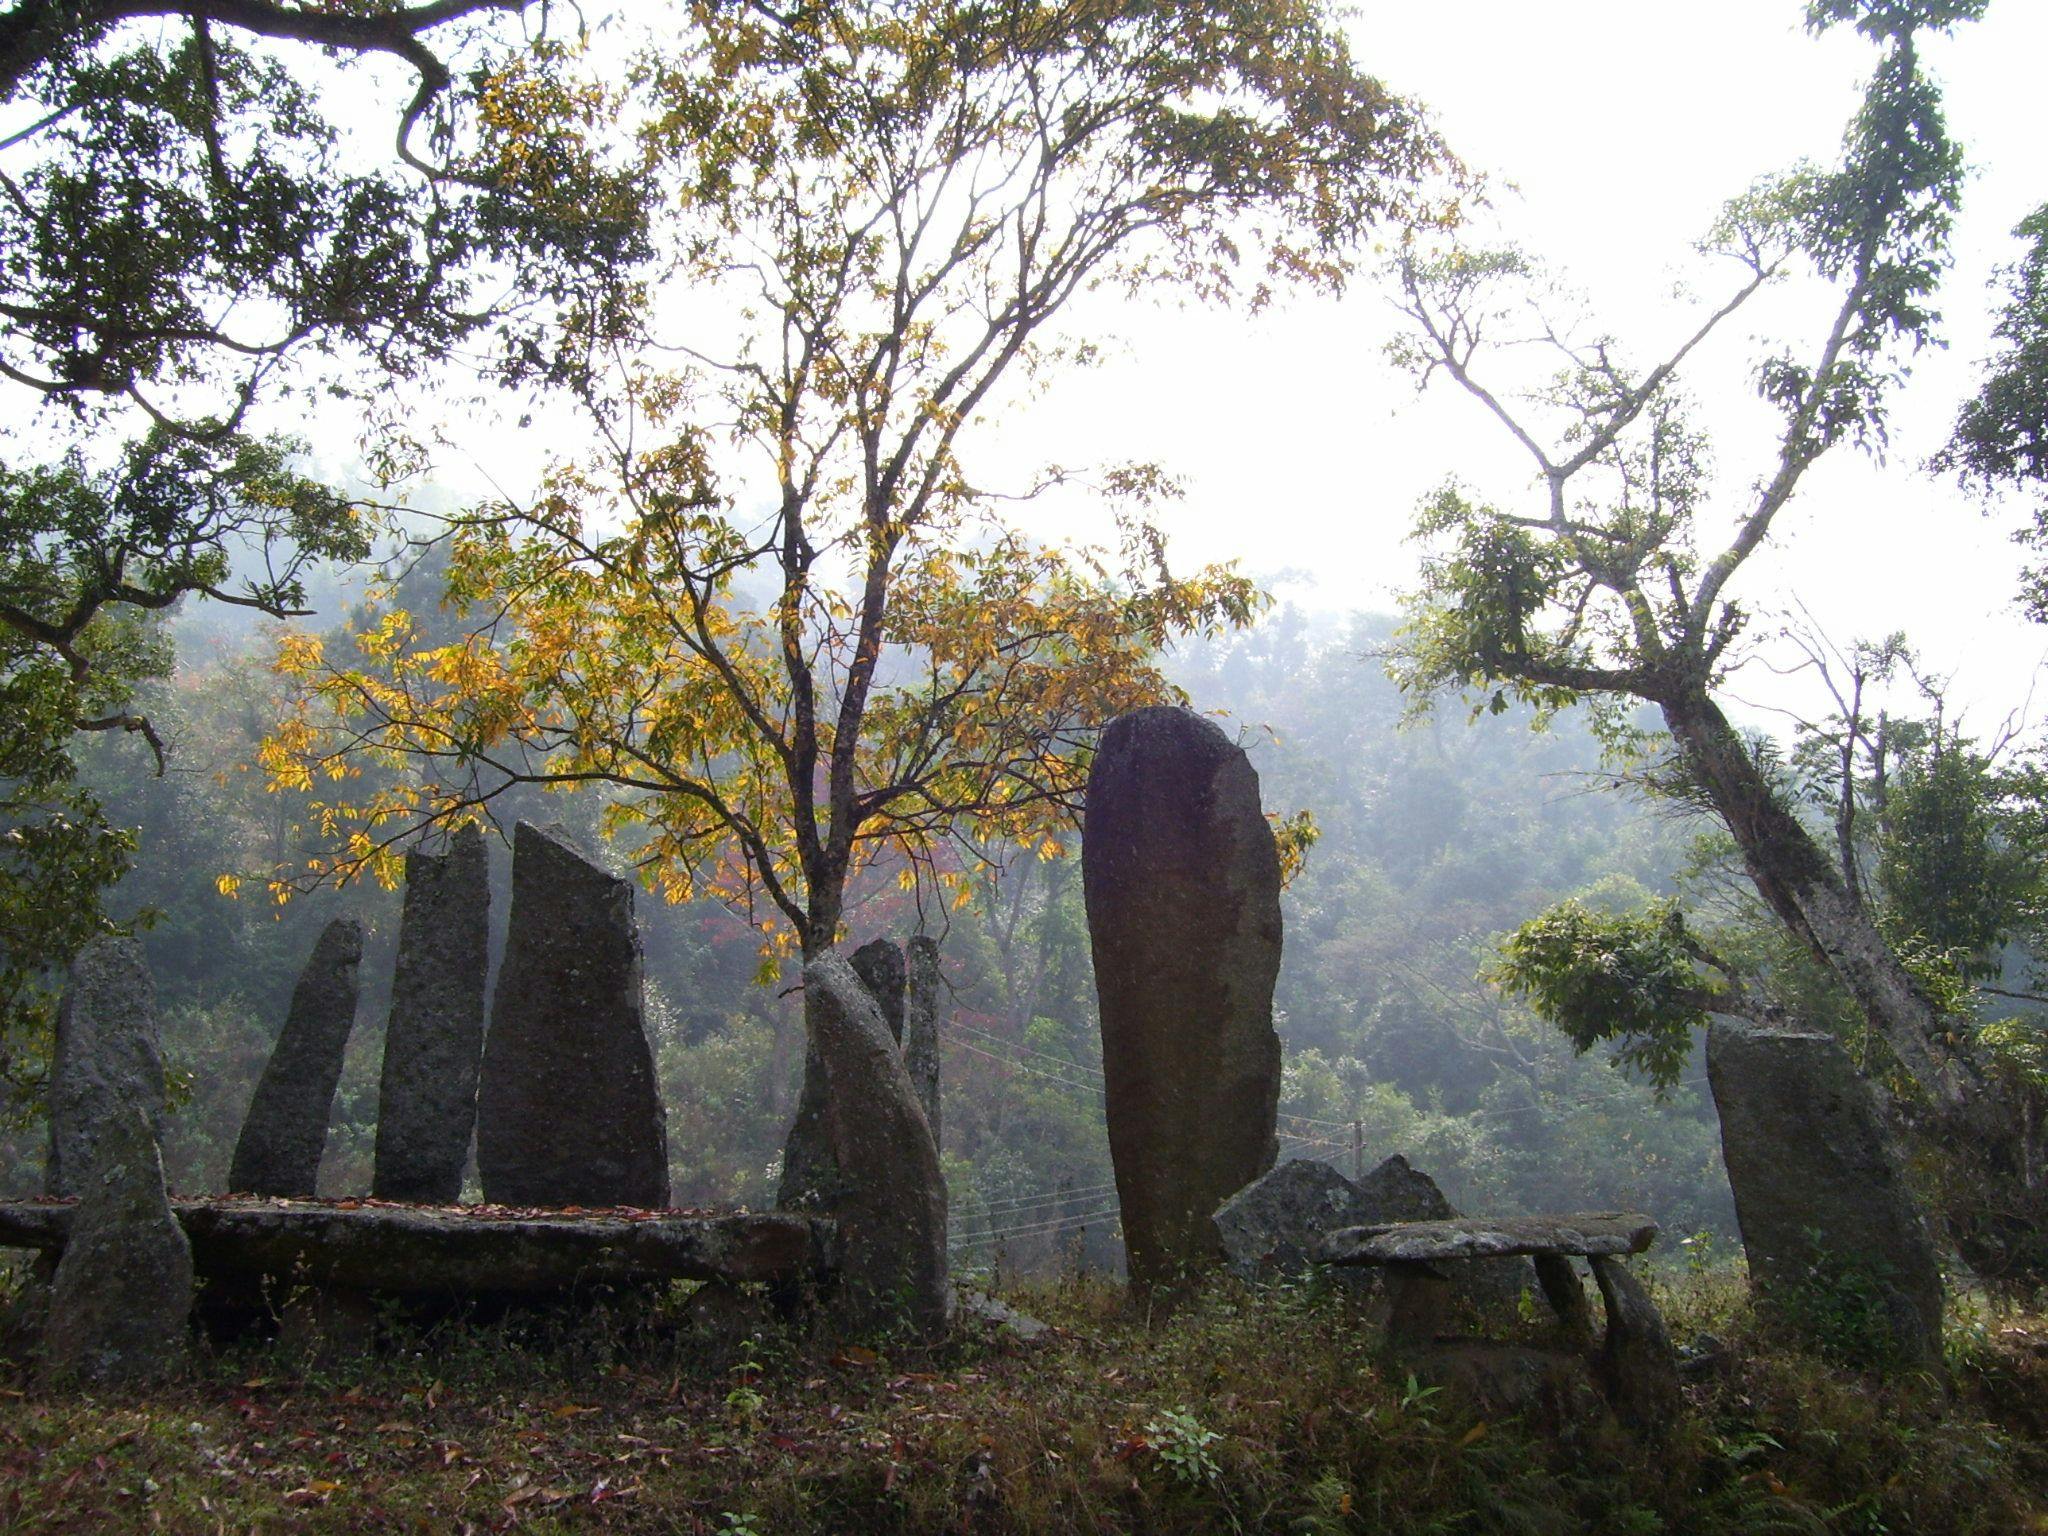 Megaliths at Nartiang which consist of the menhirs (upright stones)